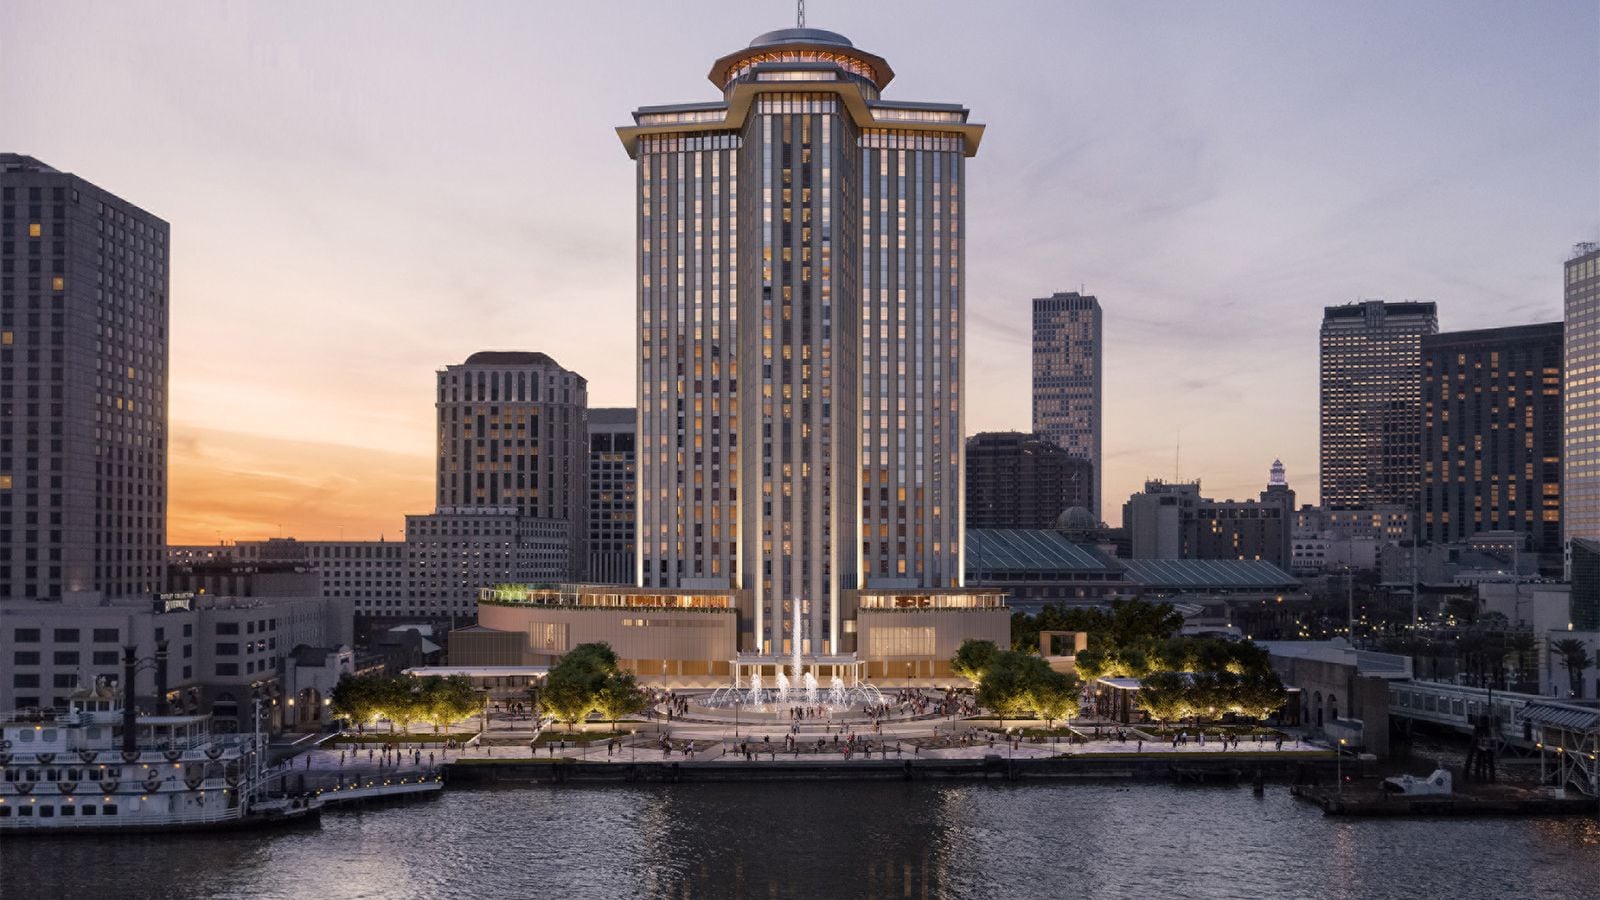 Developer Carpenter & Co. is also building the $530 million Four Seasons Hotel and...